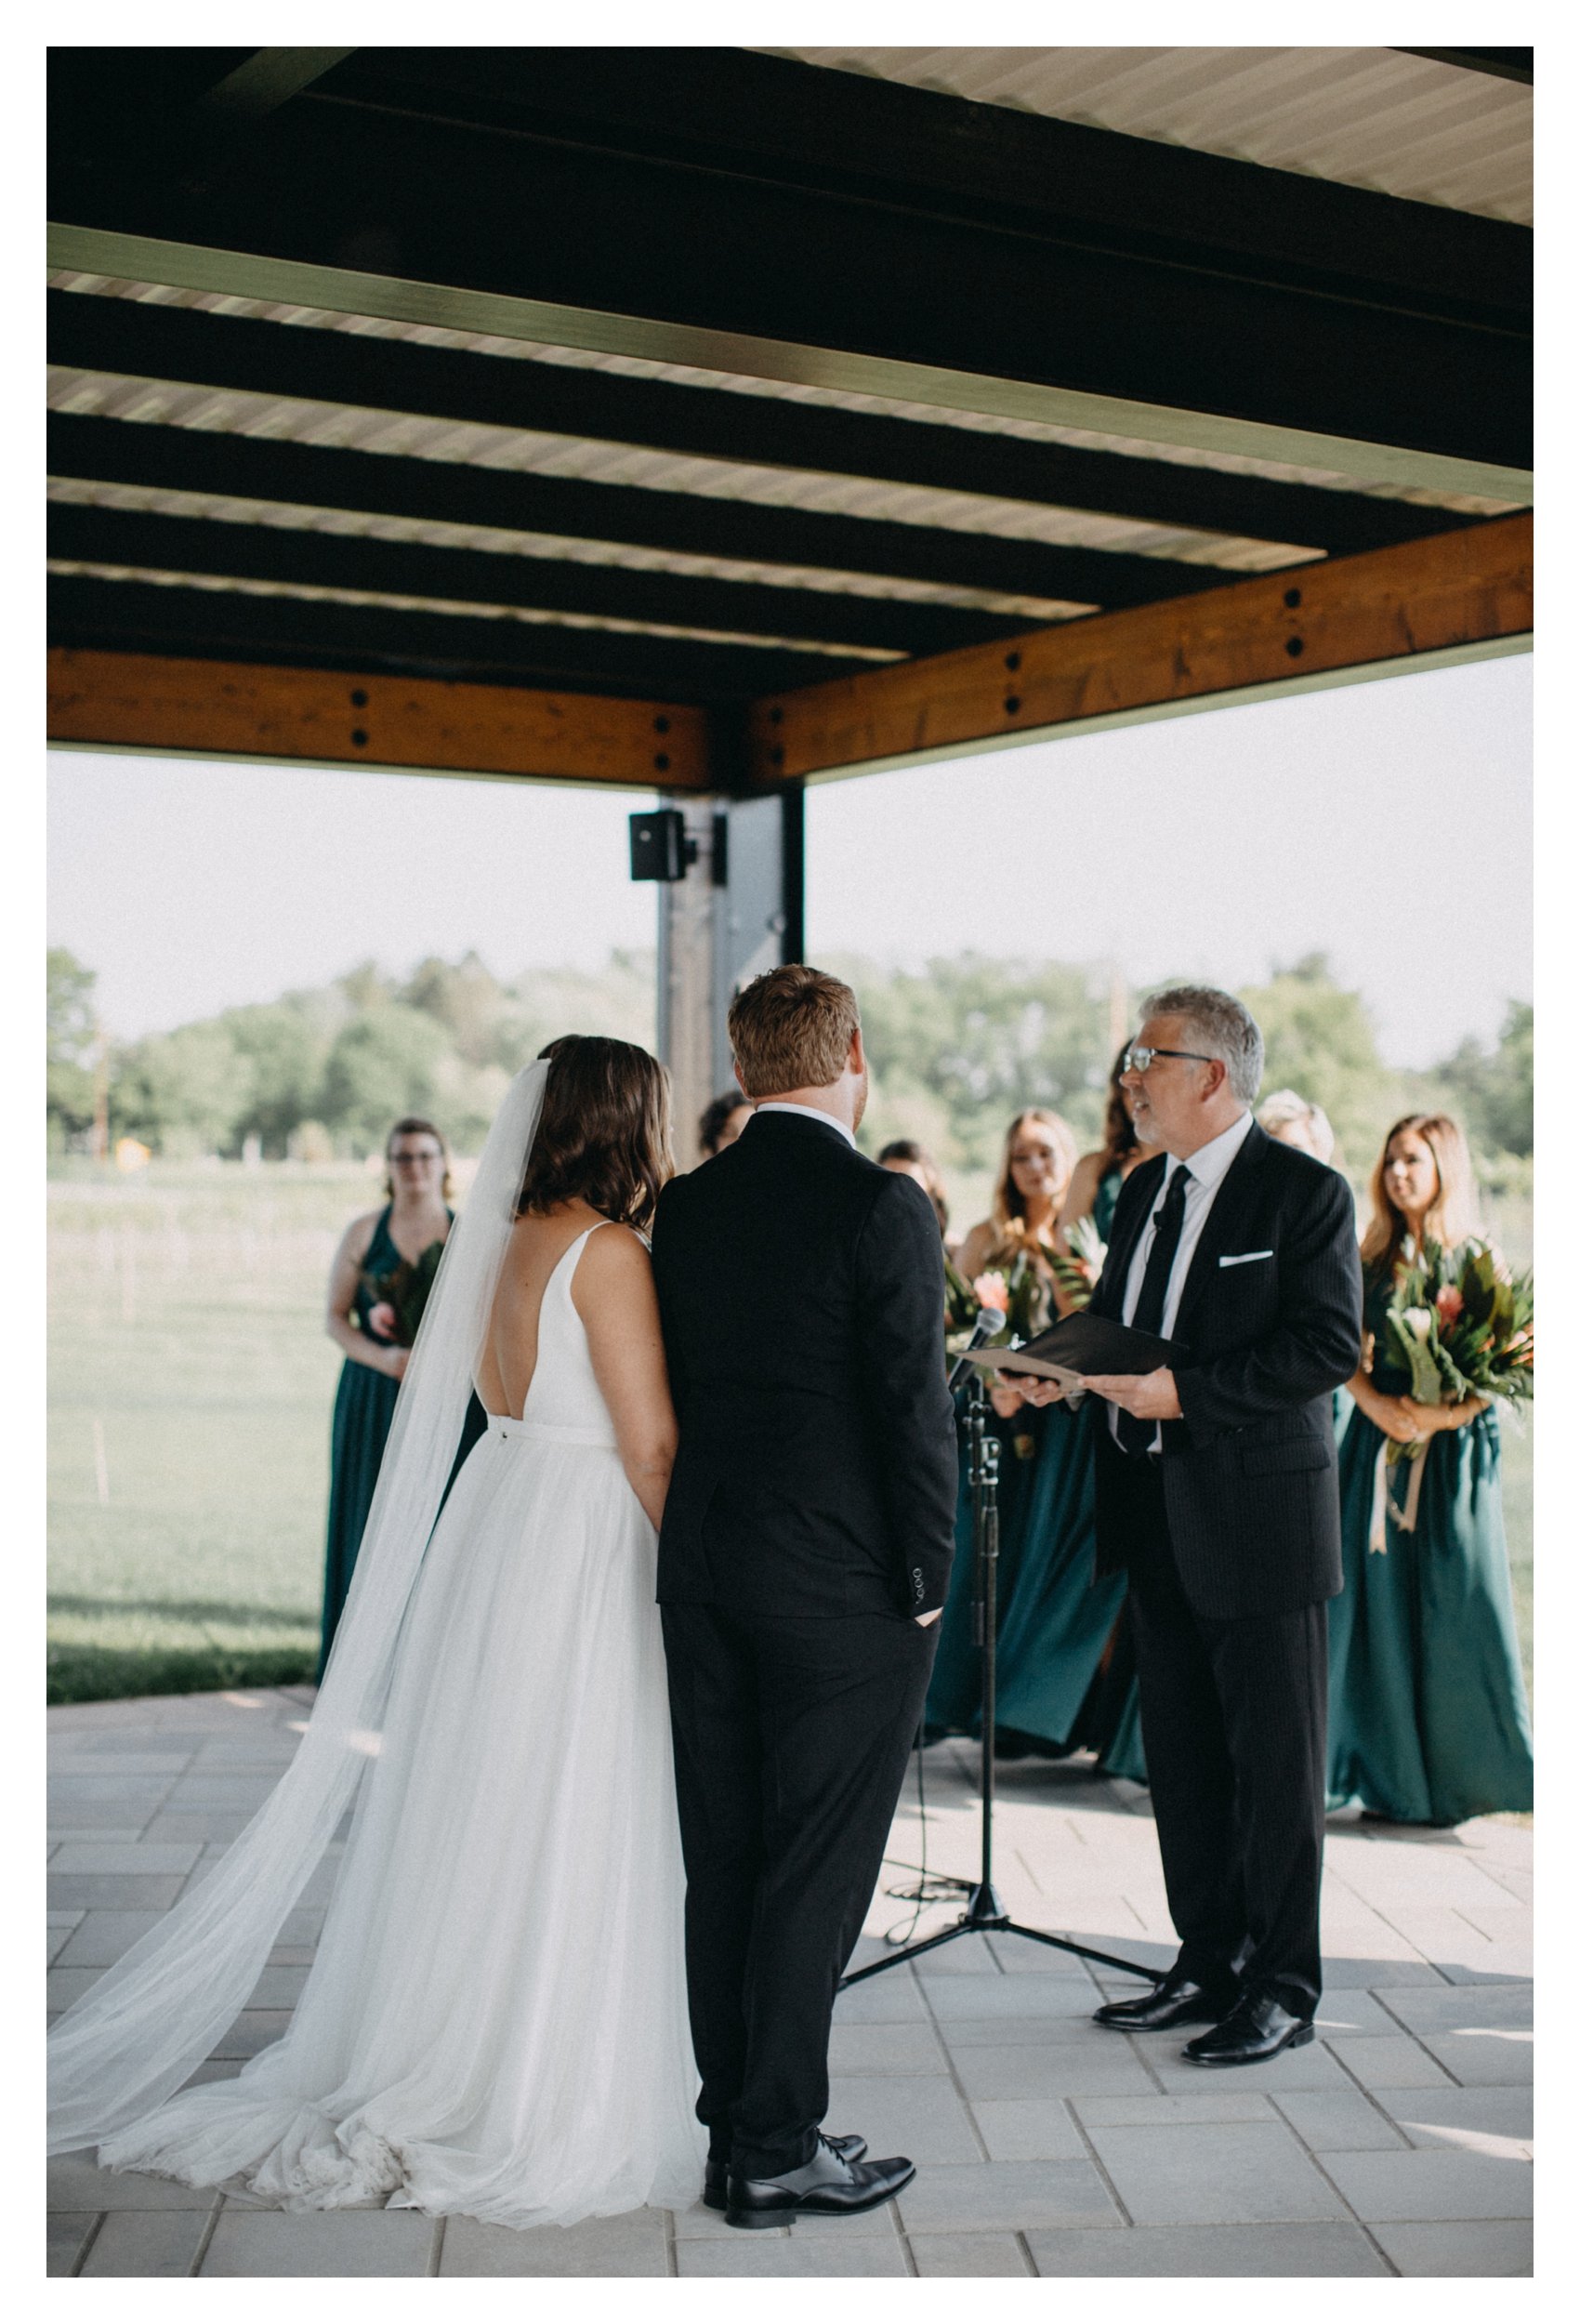 Father of the bride officiating Minnesota vineyard wedding ceremony at 7 Vines winery